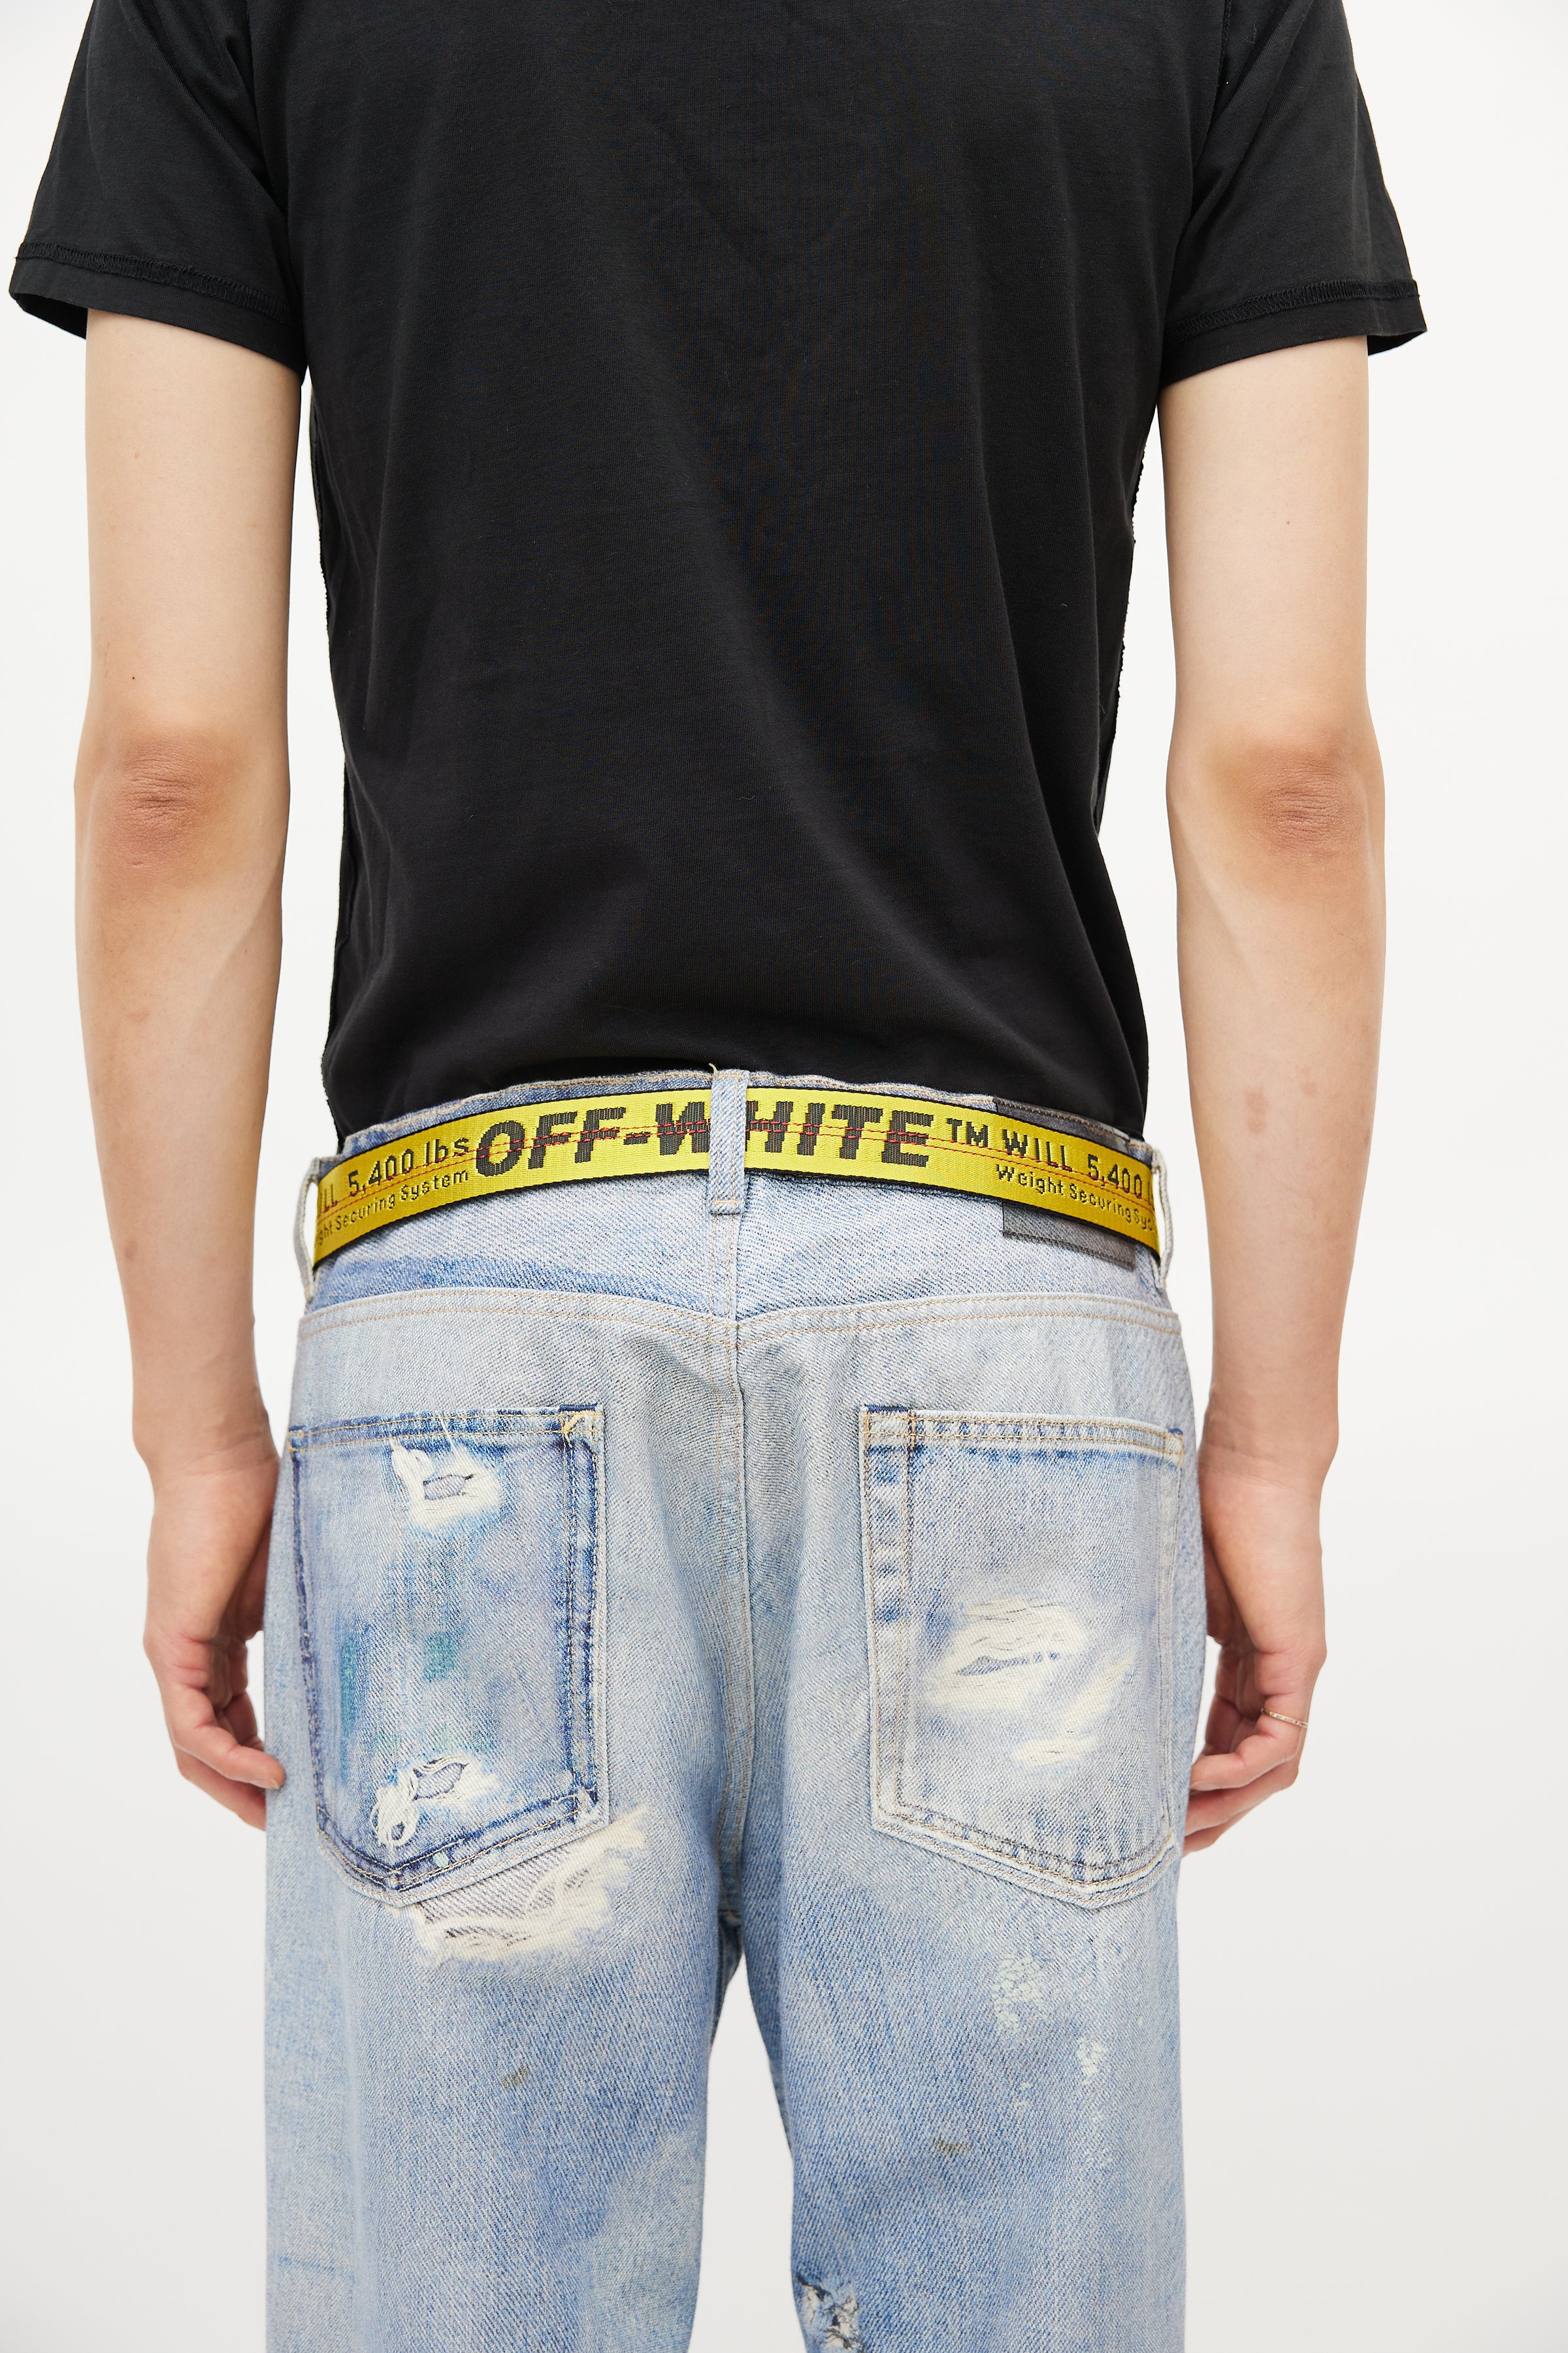 Industrial Belt in Yellow - Off White